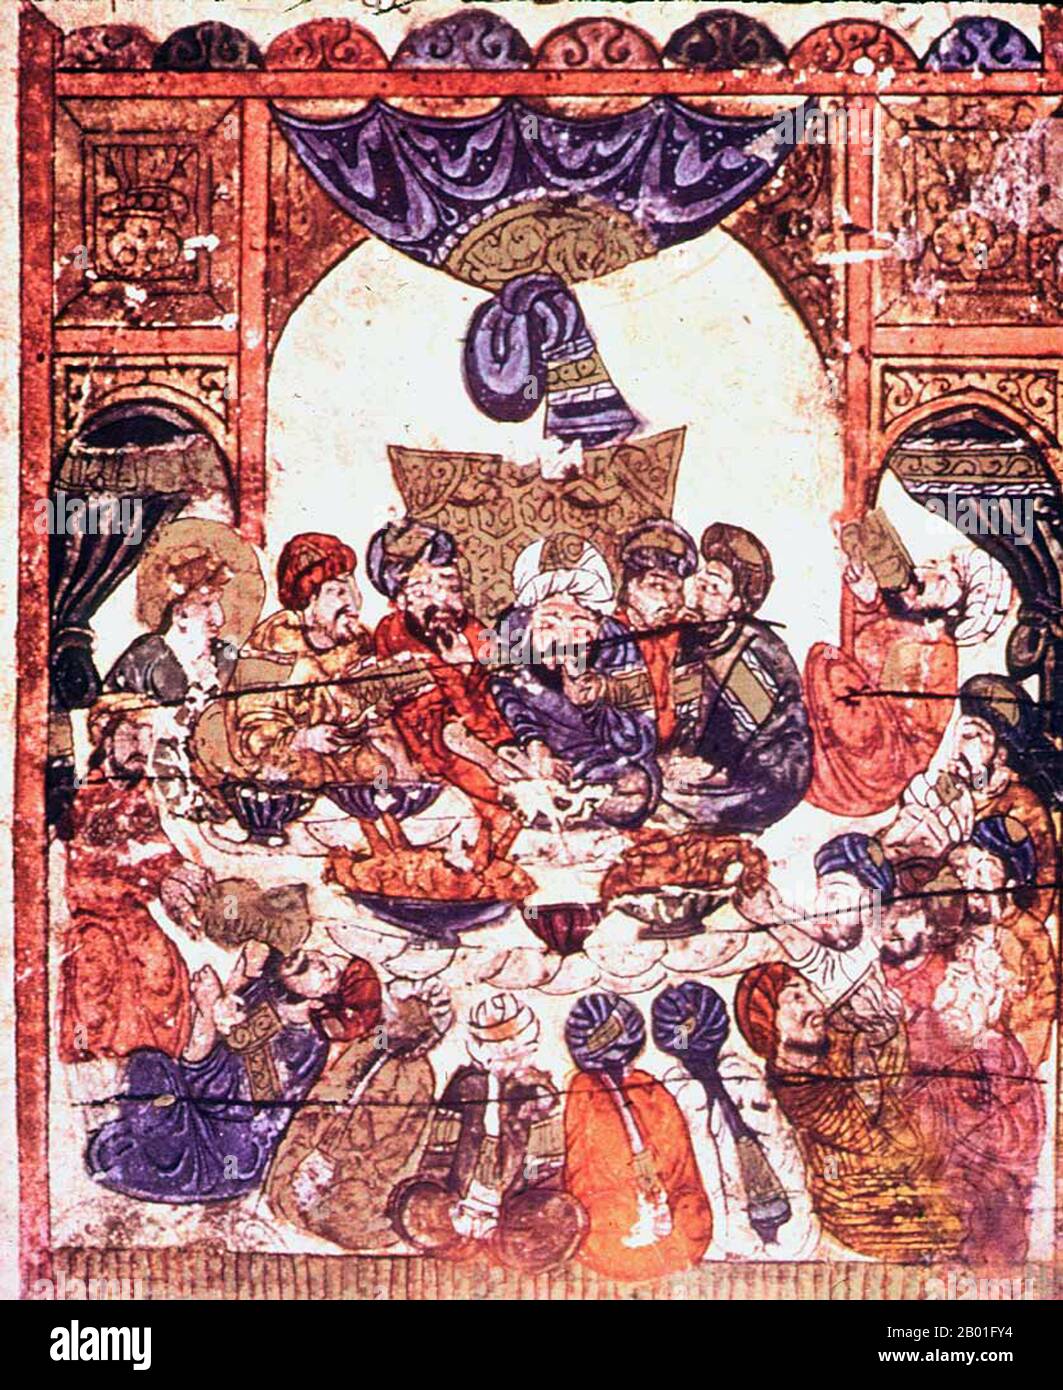 Iraq: The Wedding Banquet, Maqamat al-Hariri by al-Hariri of Basra (1054 - 10 September 1122), c. 1225-1235.  The ‘Maqama’ are a collection of picaresque Arabic tales written in the form of rhymed prose in which rhetorical extravagance is conspicuous. The style was invented in the 10th century by Badi al-Zaman al-Hamadhani and extended by Abu Muhammad al-Qasim ibn Ali al-Hariri of Basra the following century.  Al-Hariri was an Arab poet and scholar, and a high government official of the Seljuks. His best known work was his Maqamat al-Hariri, a collection of over 50 stories. Stock Photo